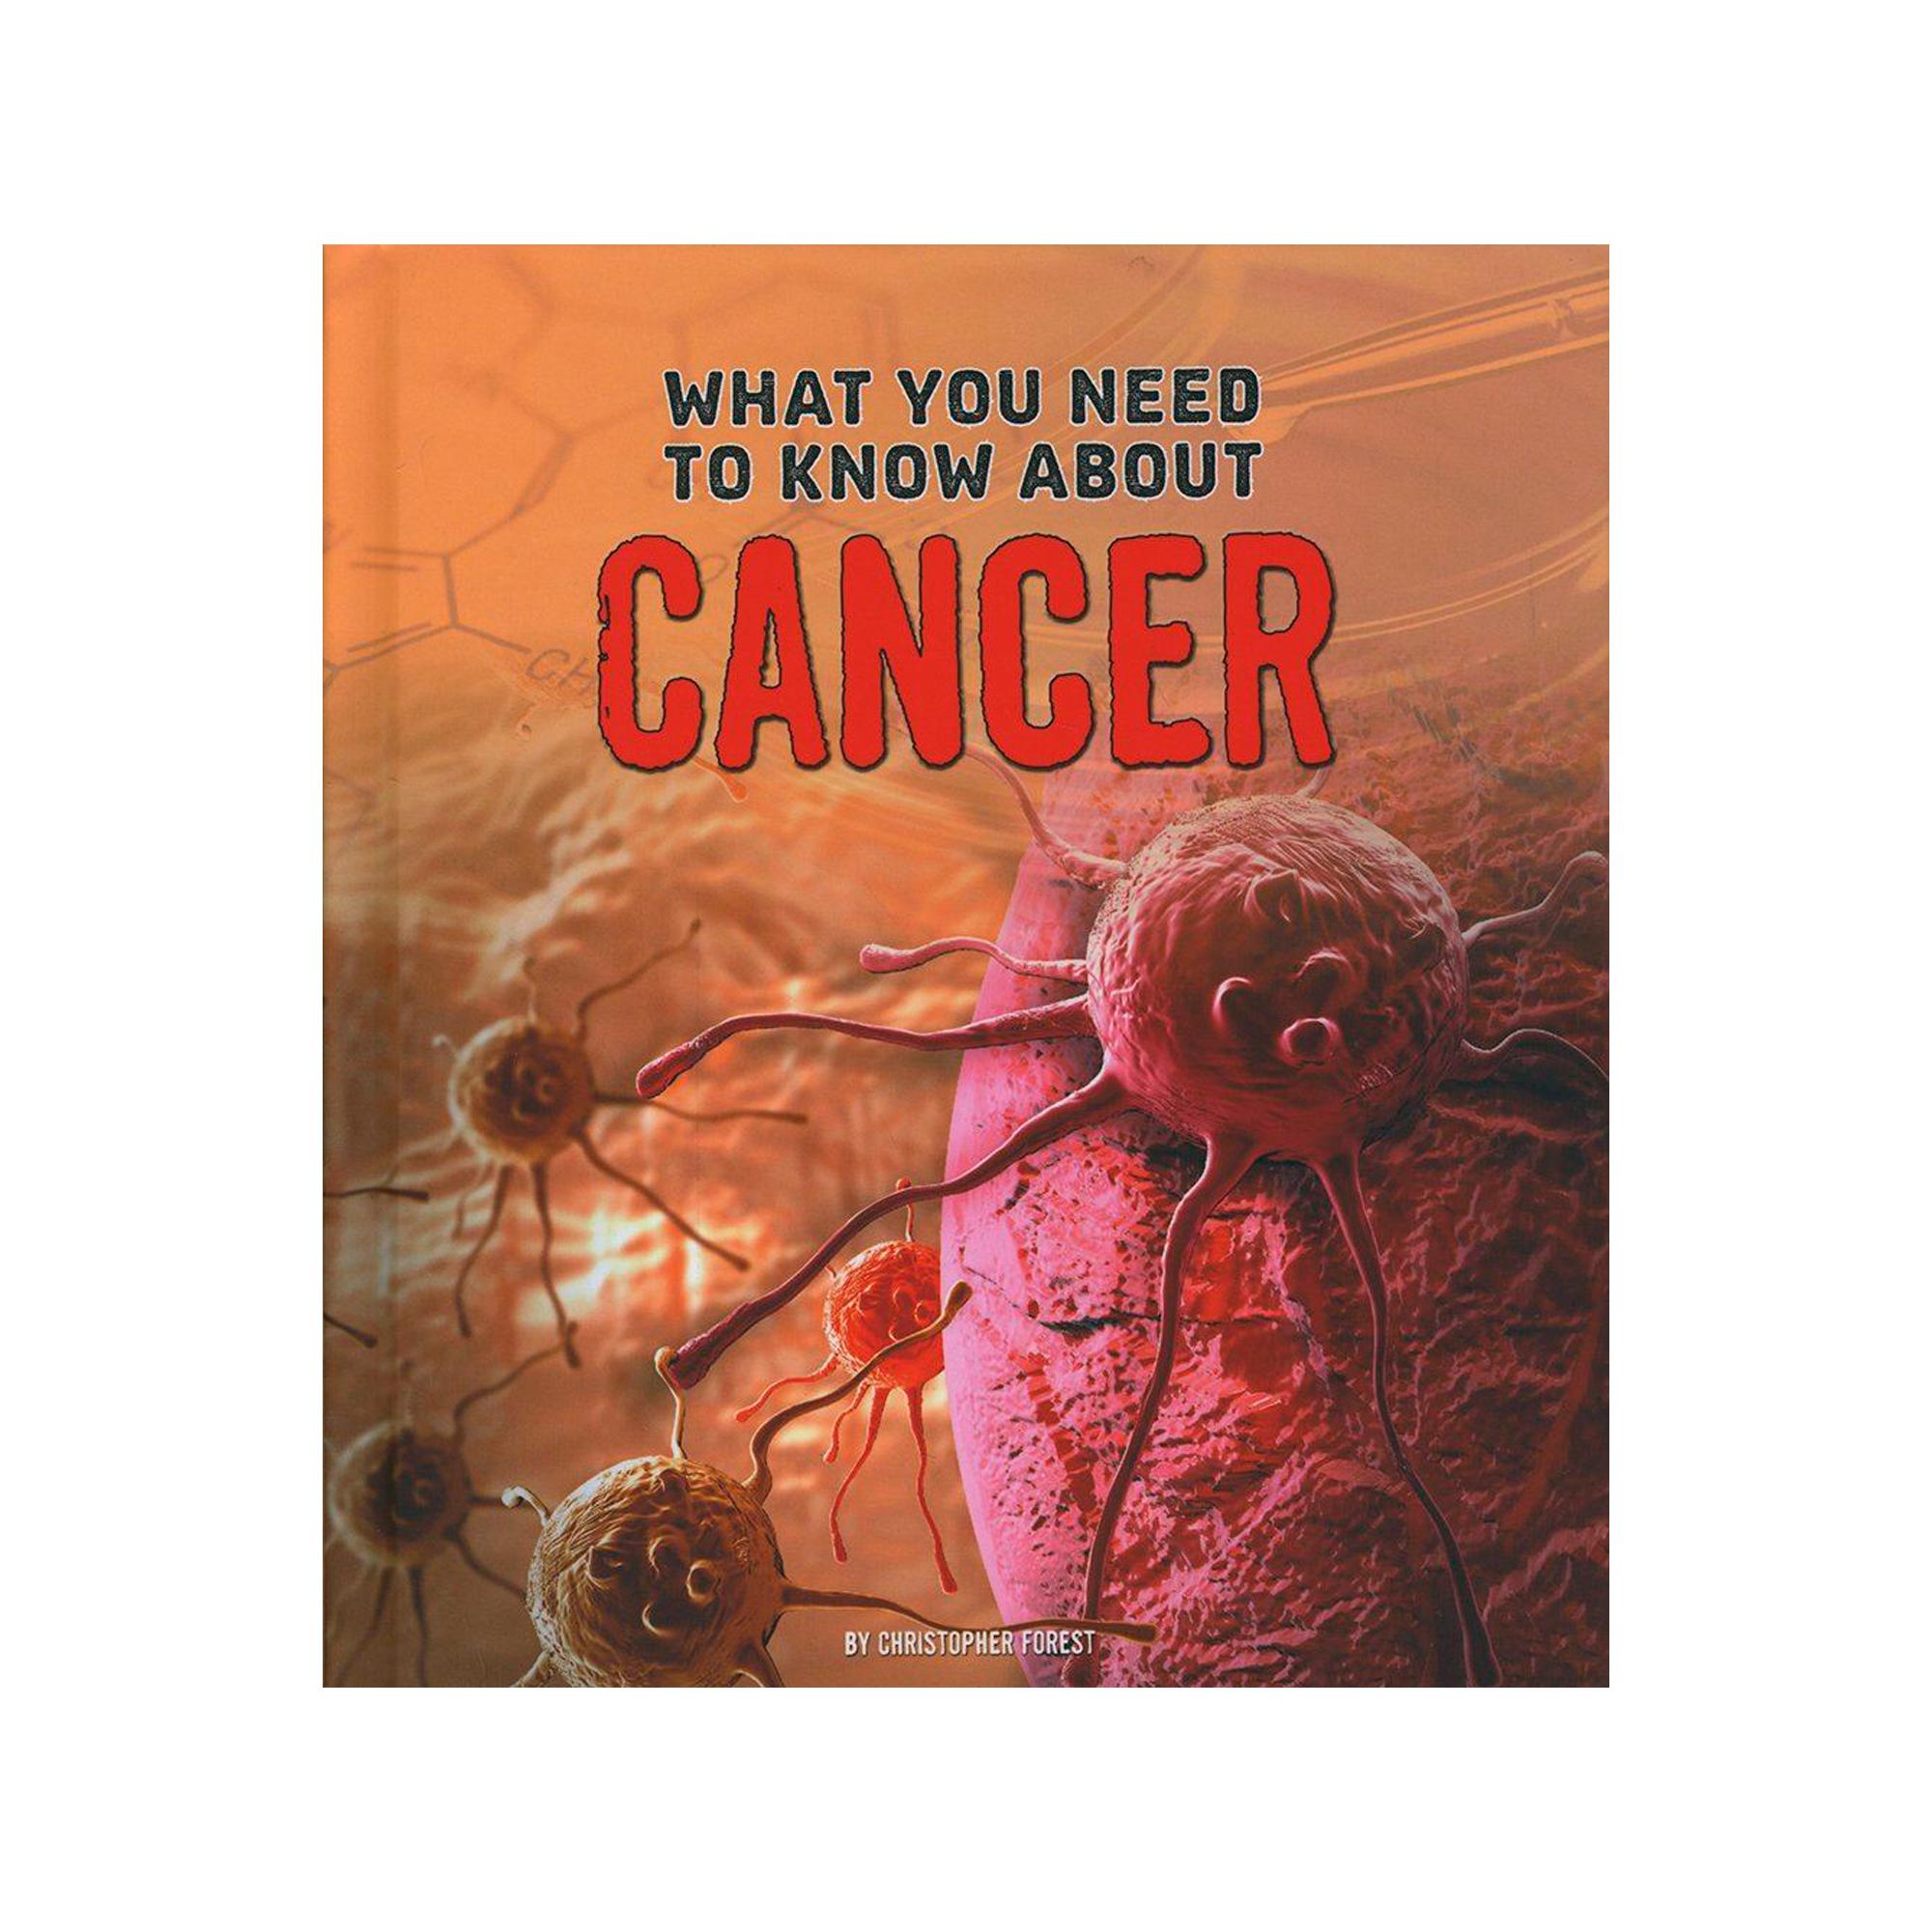 books about cancer research